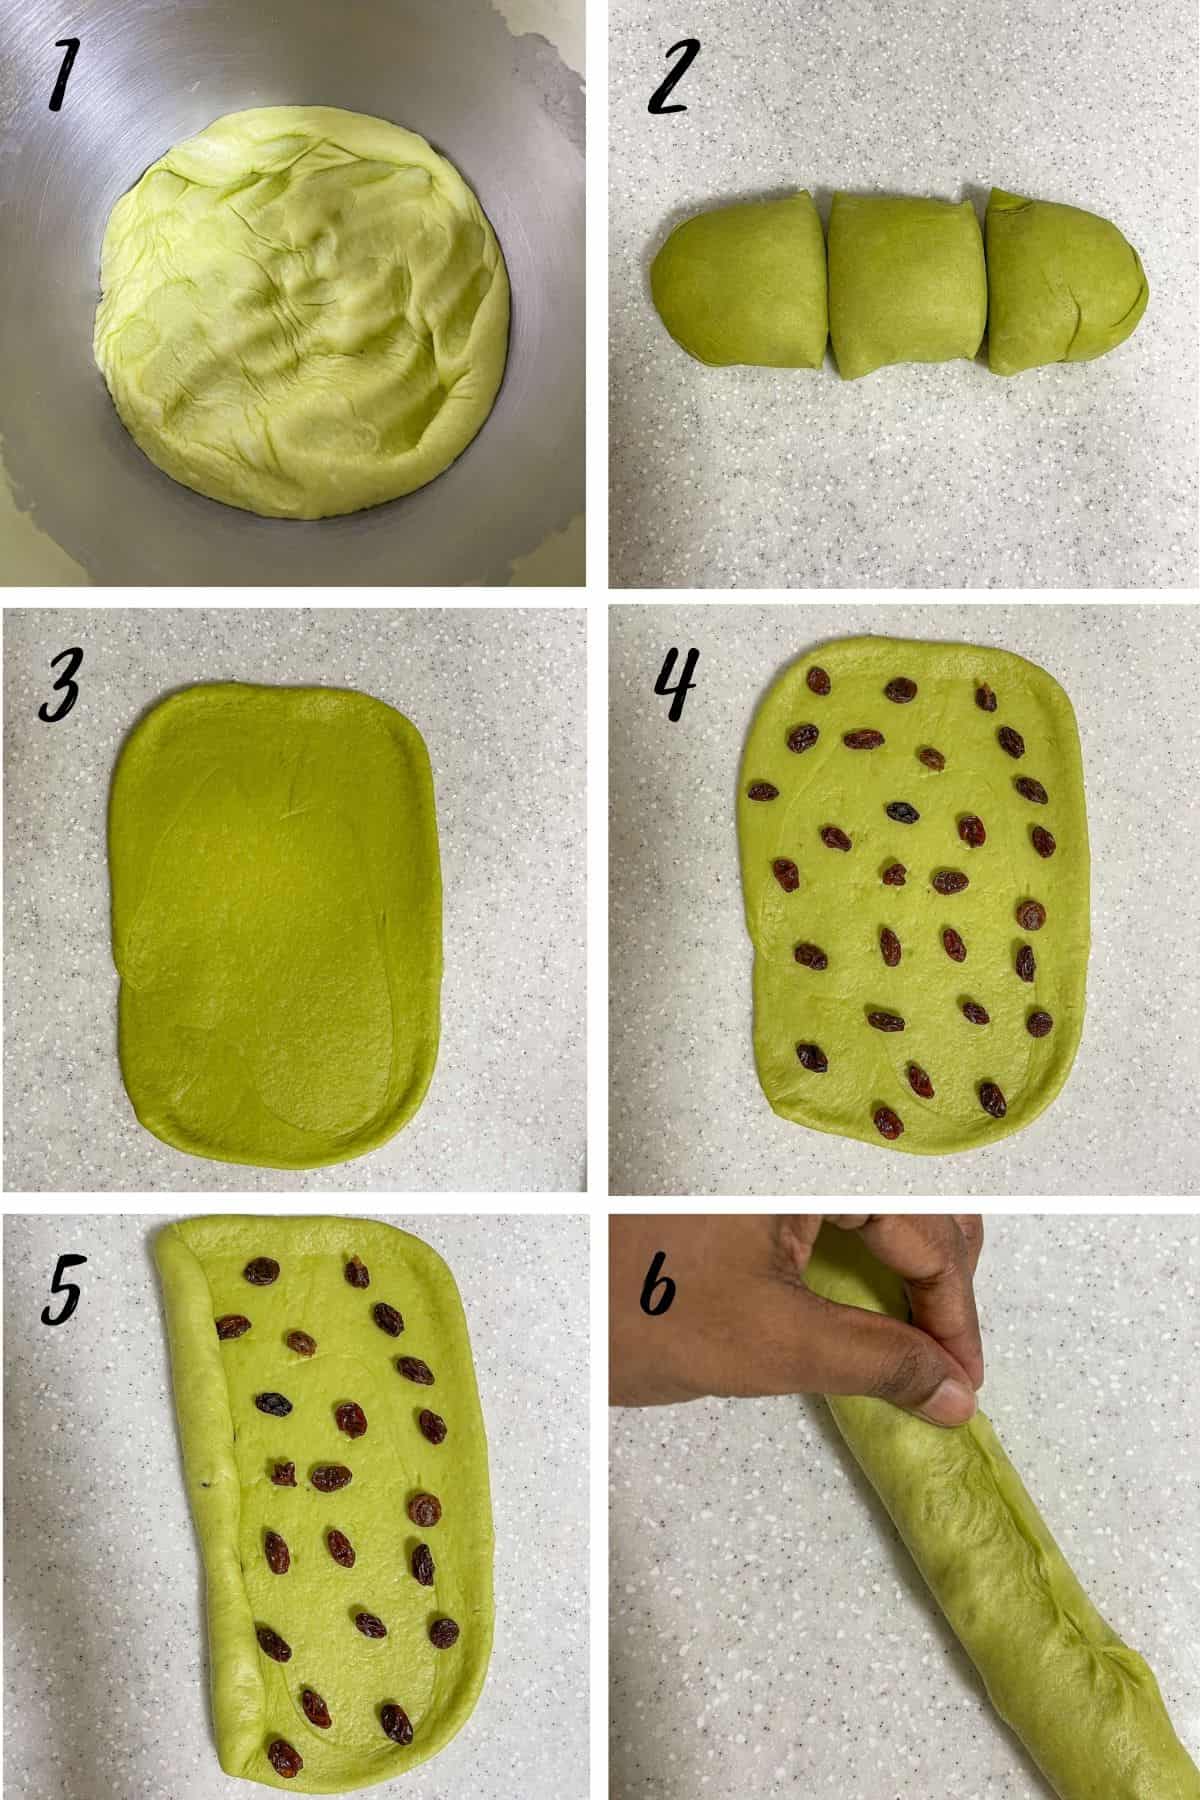 A poster of 6 images showing how to roll dough with raisins.